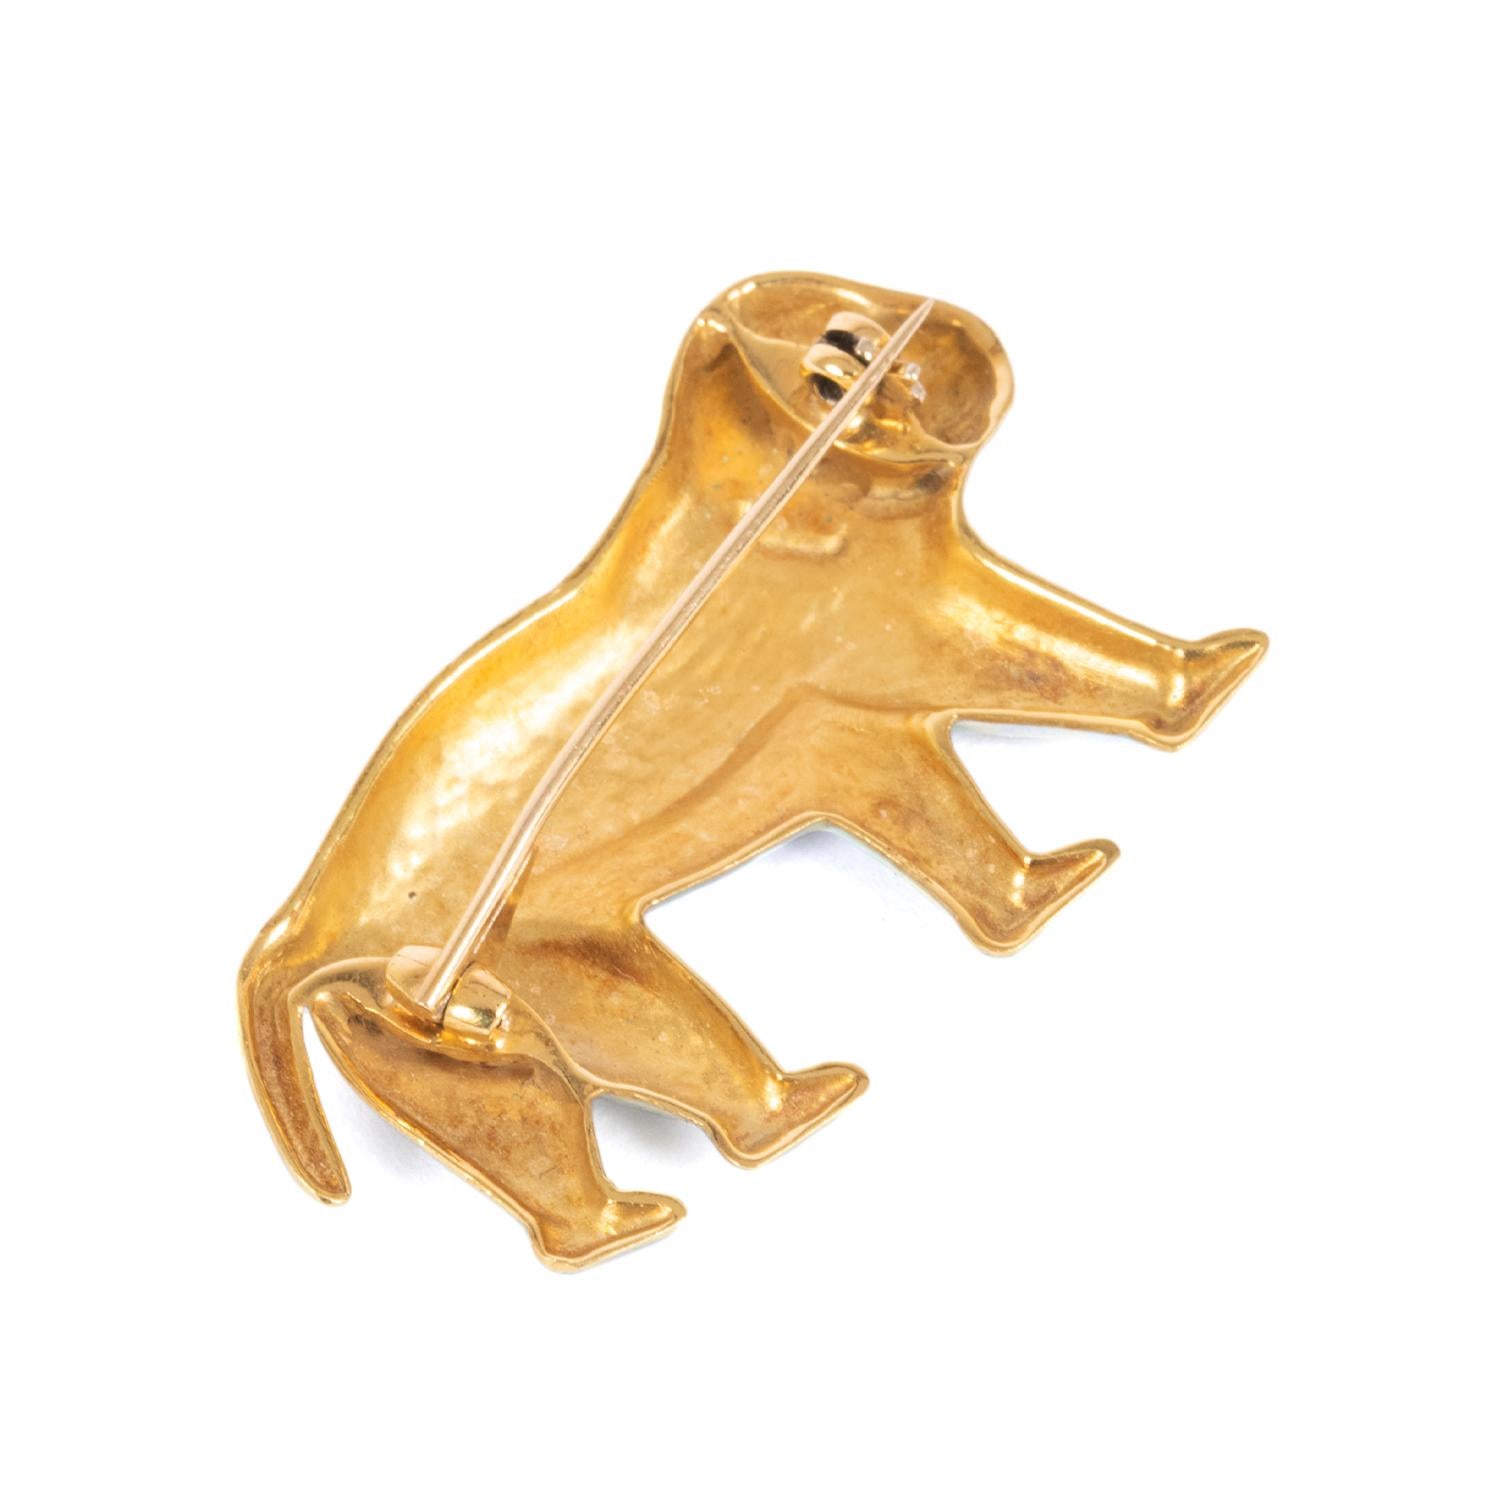 Giancarlo Montebello 18 K Gold White Enamel Monkey Brooch In New Condition For Sale In Bari, IT